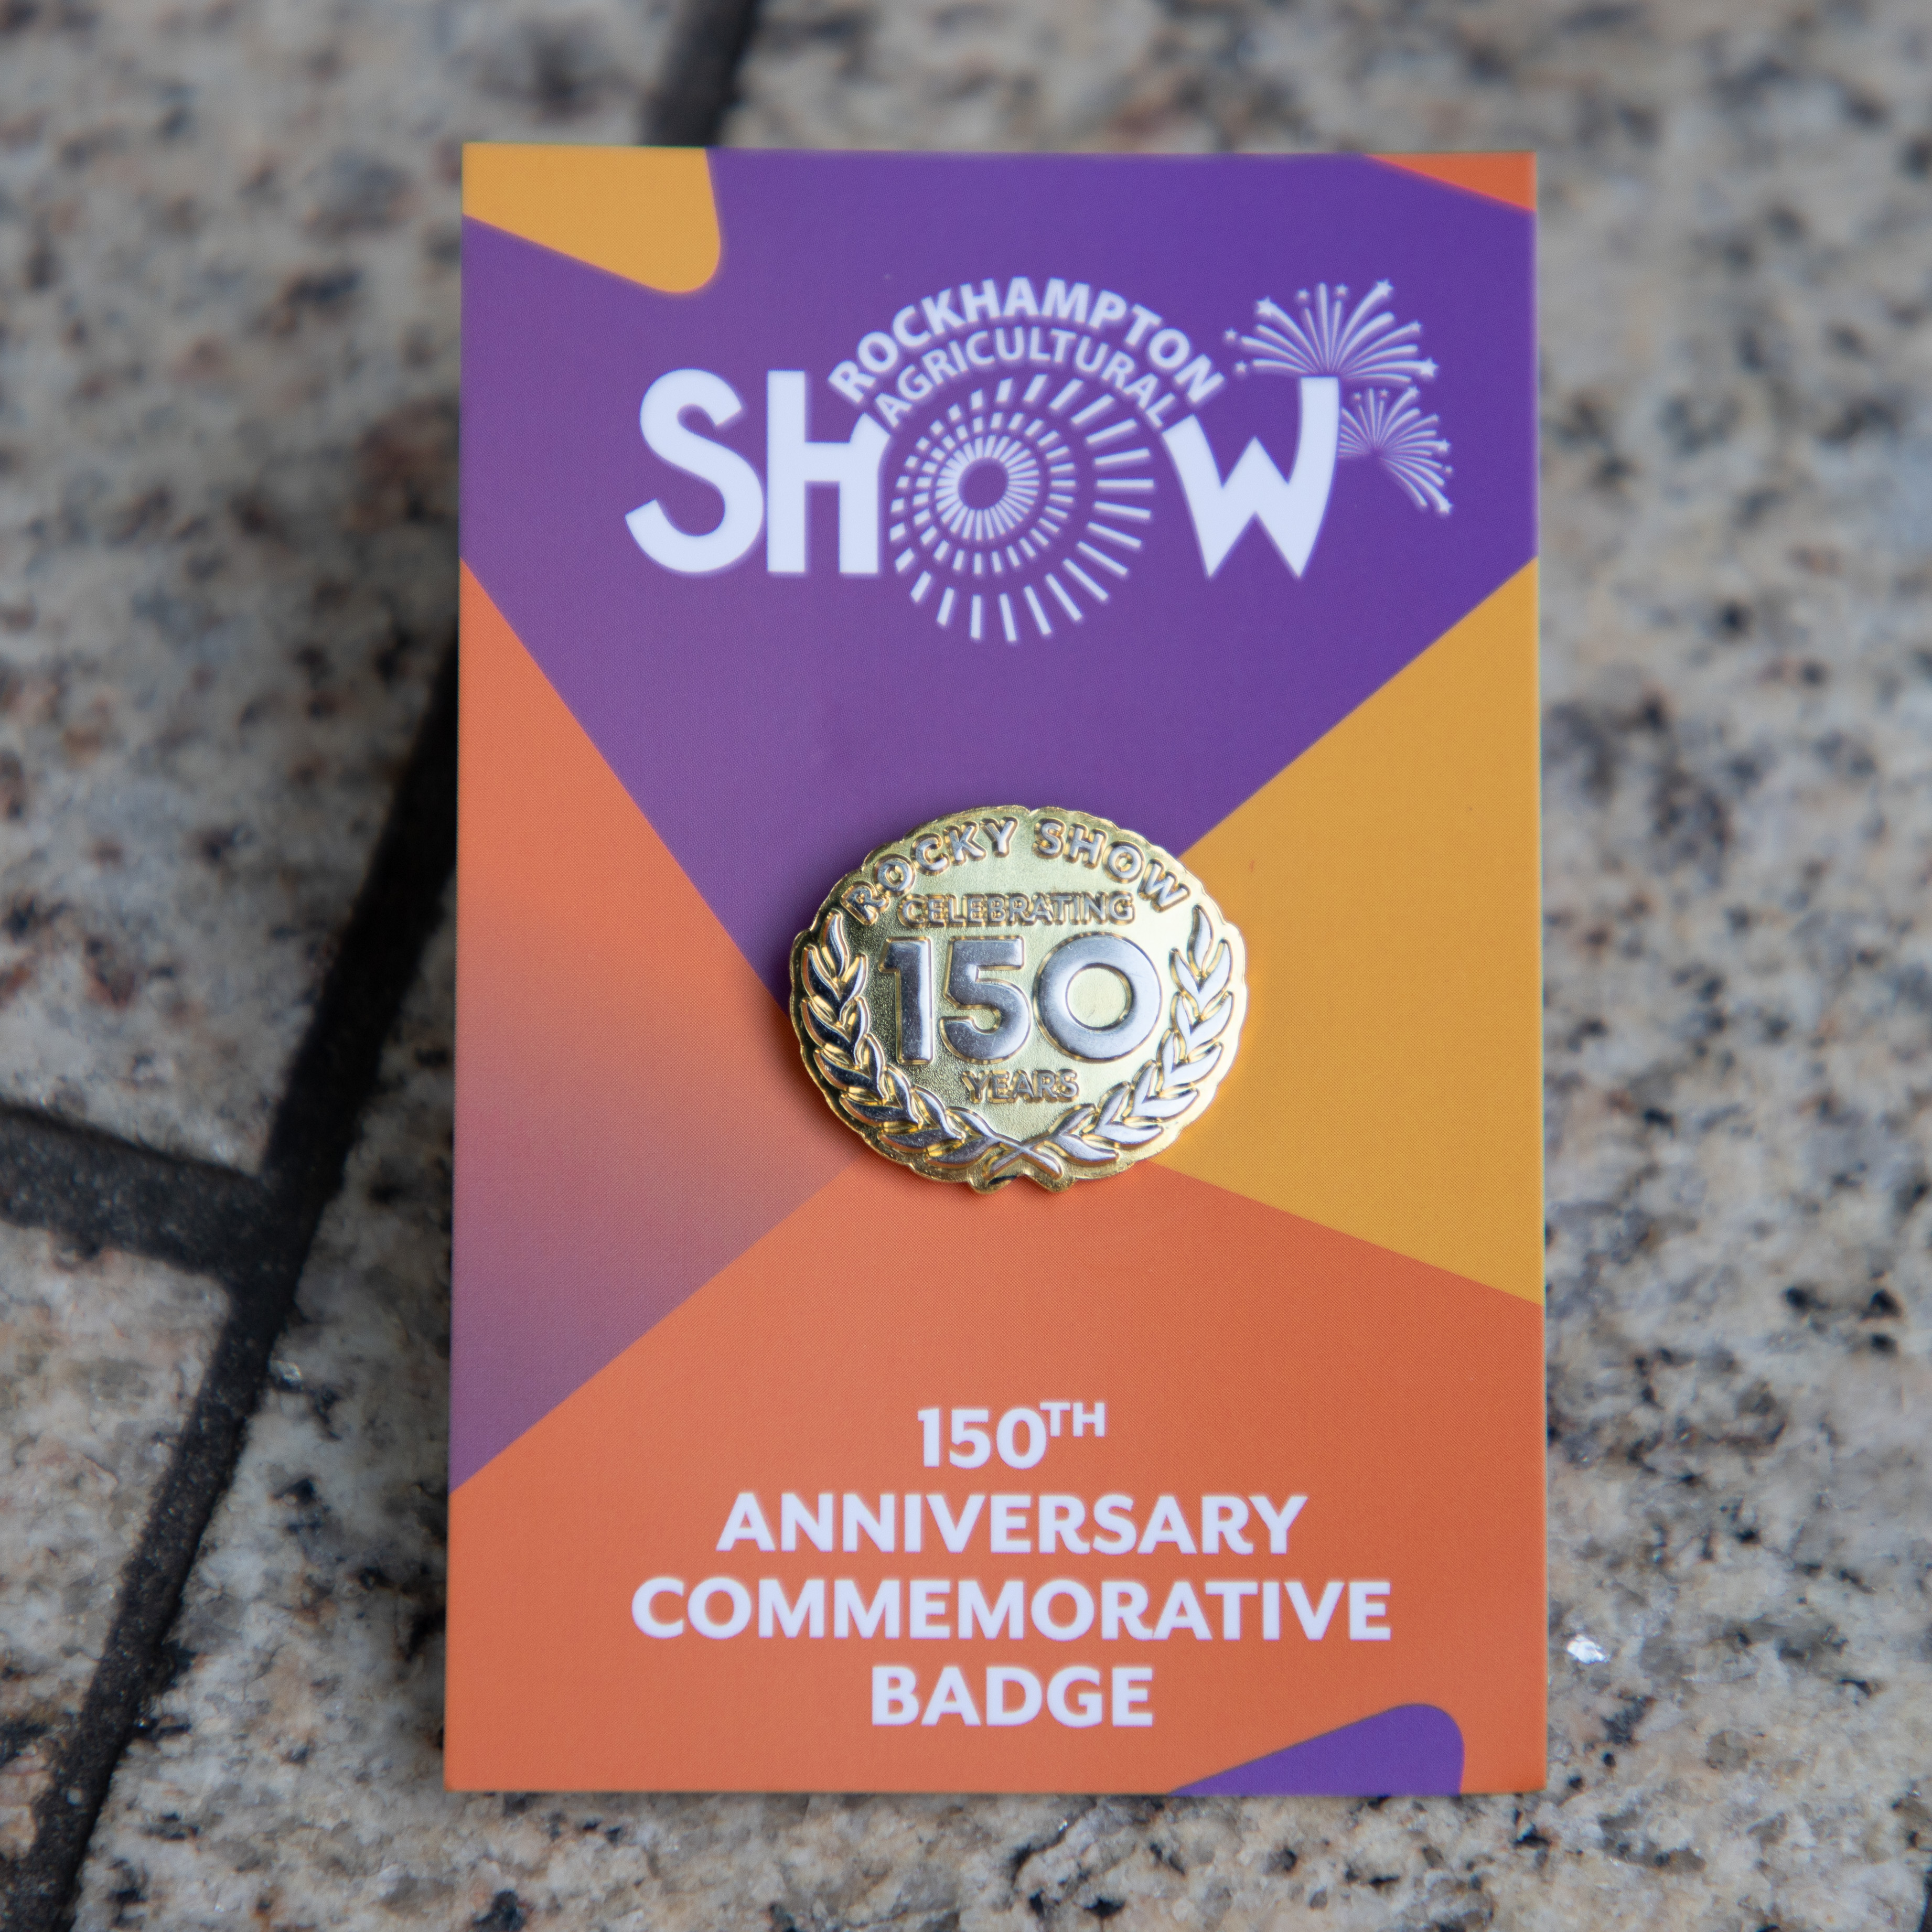 Rockhampton Agricultural Show 150th Anniversary Pin